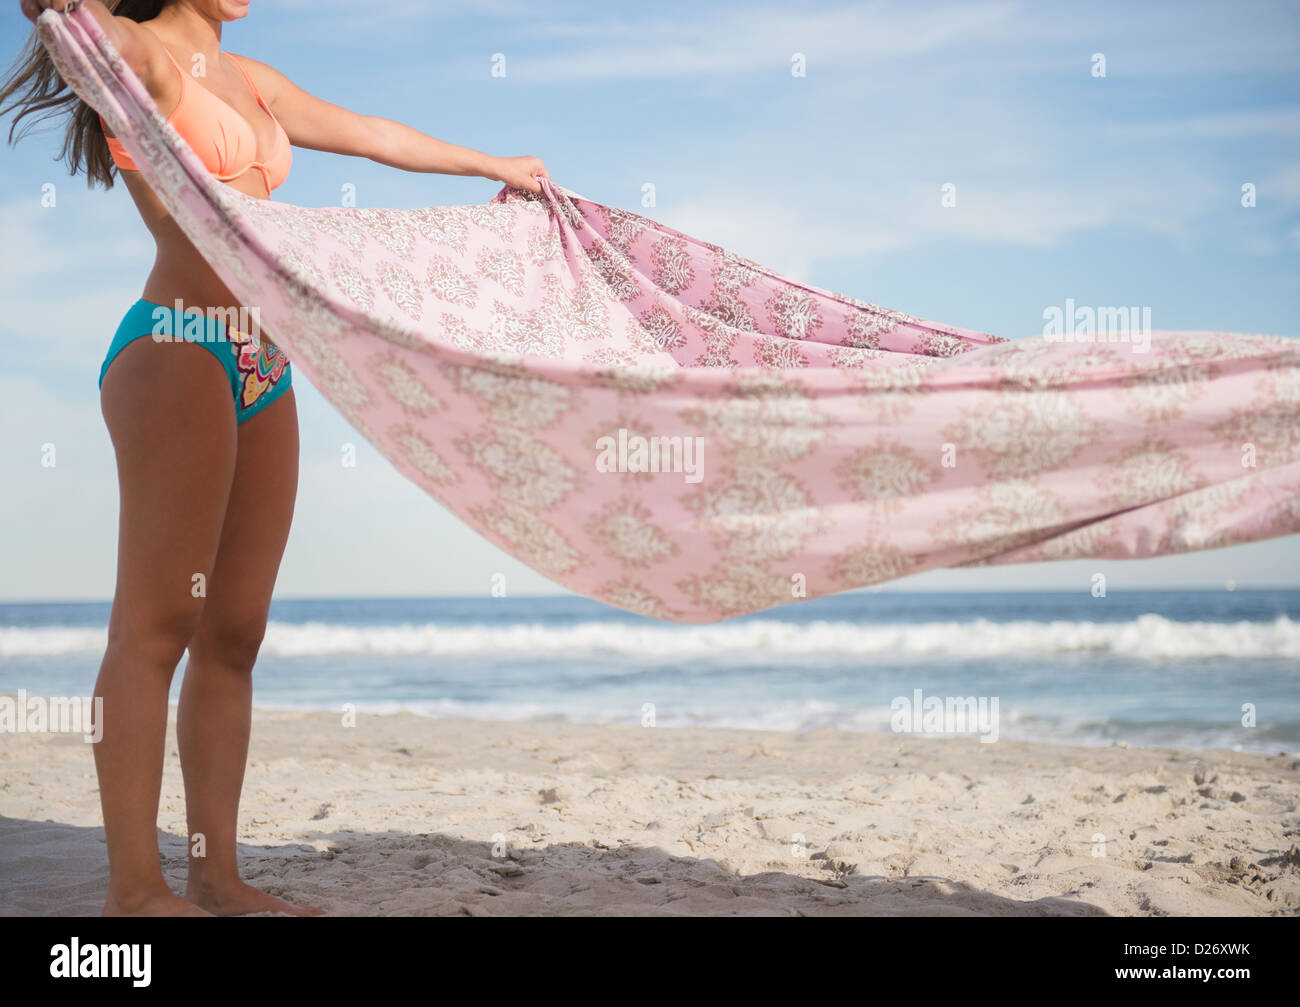 USA, New York State, Rockaway Beach, Woman on beach blanket Banque D'Images